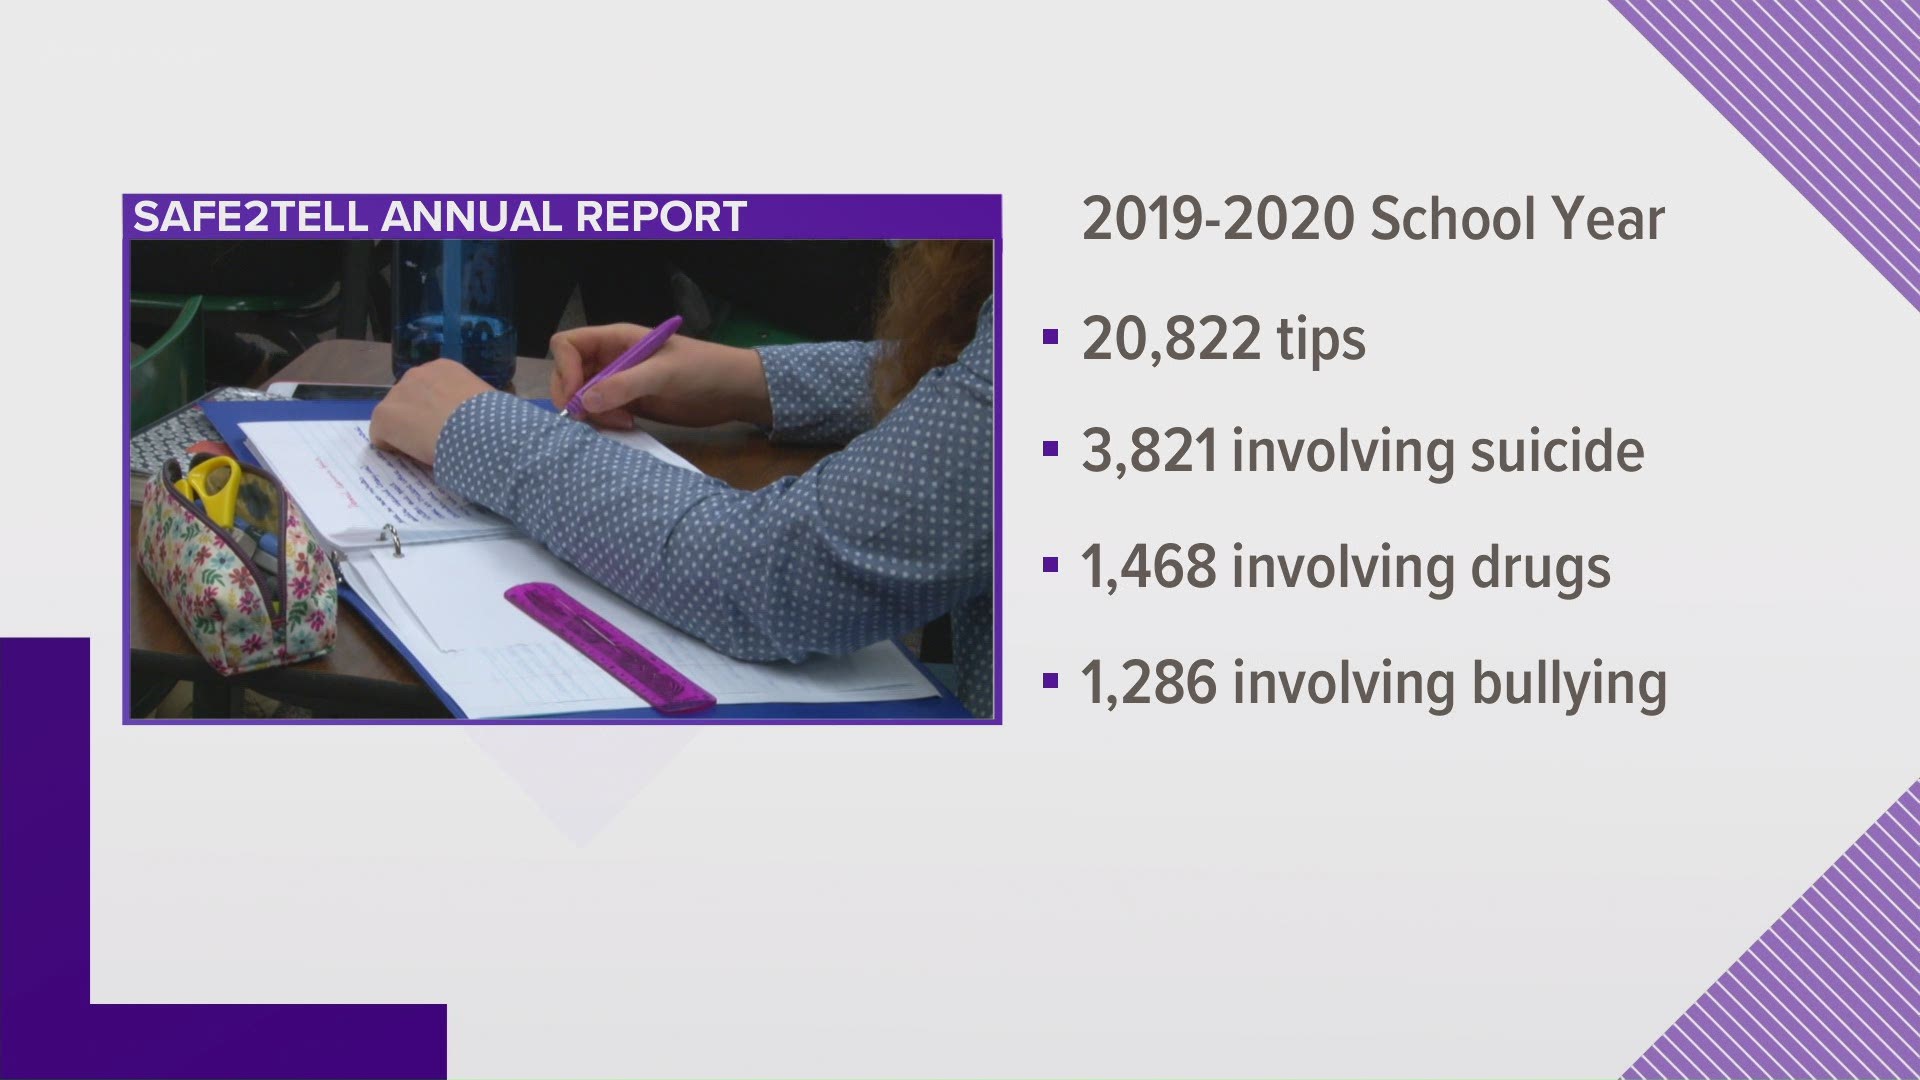 The decrease in tip volume came after schools shifted to online learning in March amid the COVID-19 pandemic, according to Safe2Tell’s 2019-2020 annual report.